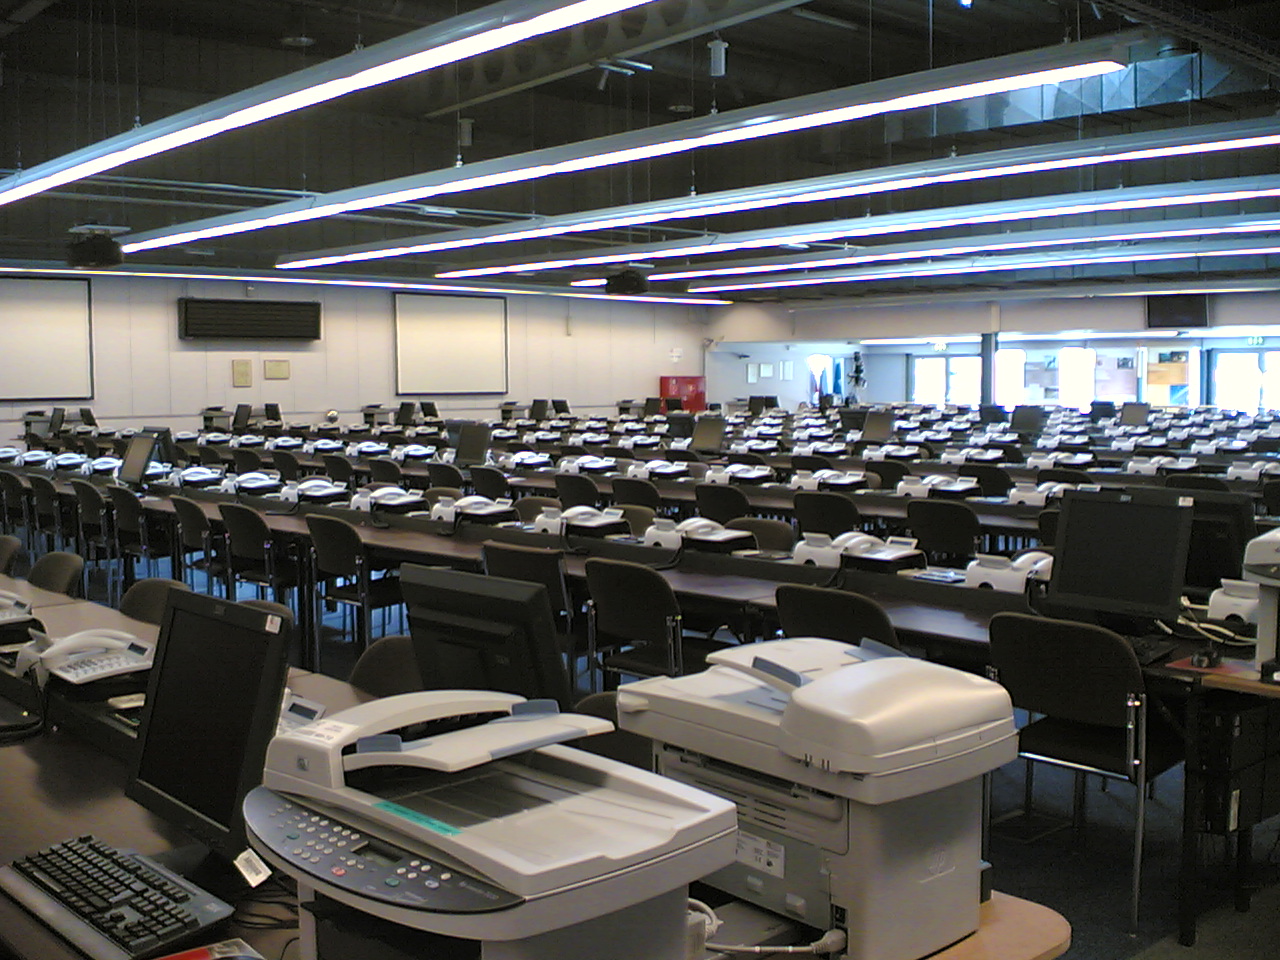 a room filled with computer equipment and laptops